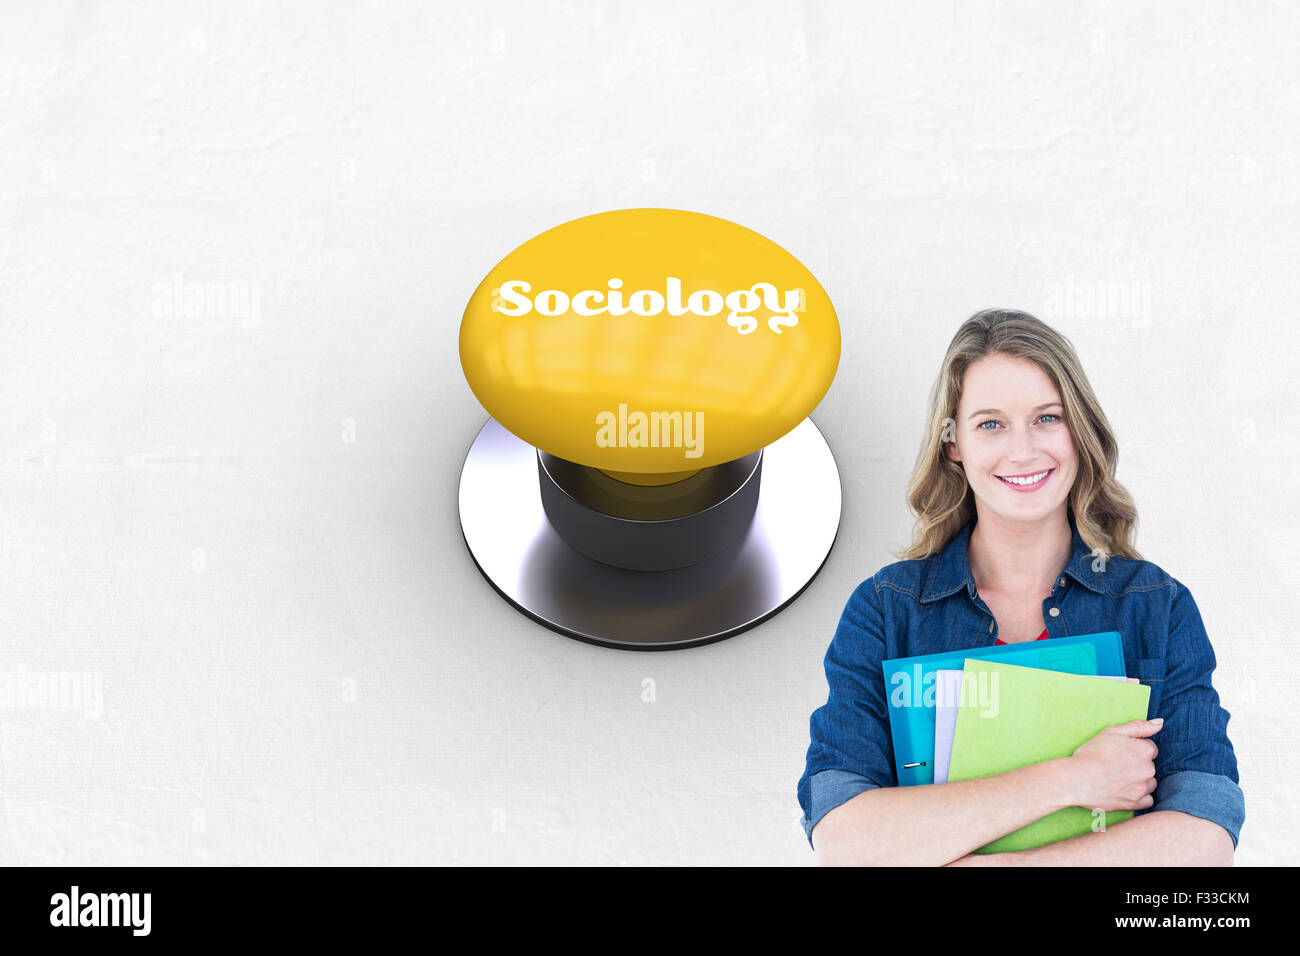 Sociology against yellow push button Stock Photo